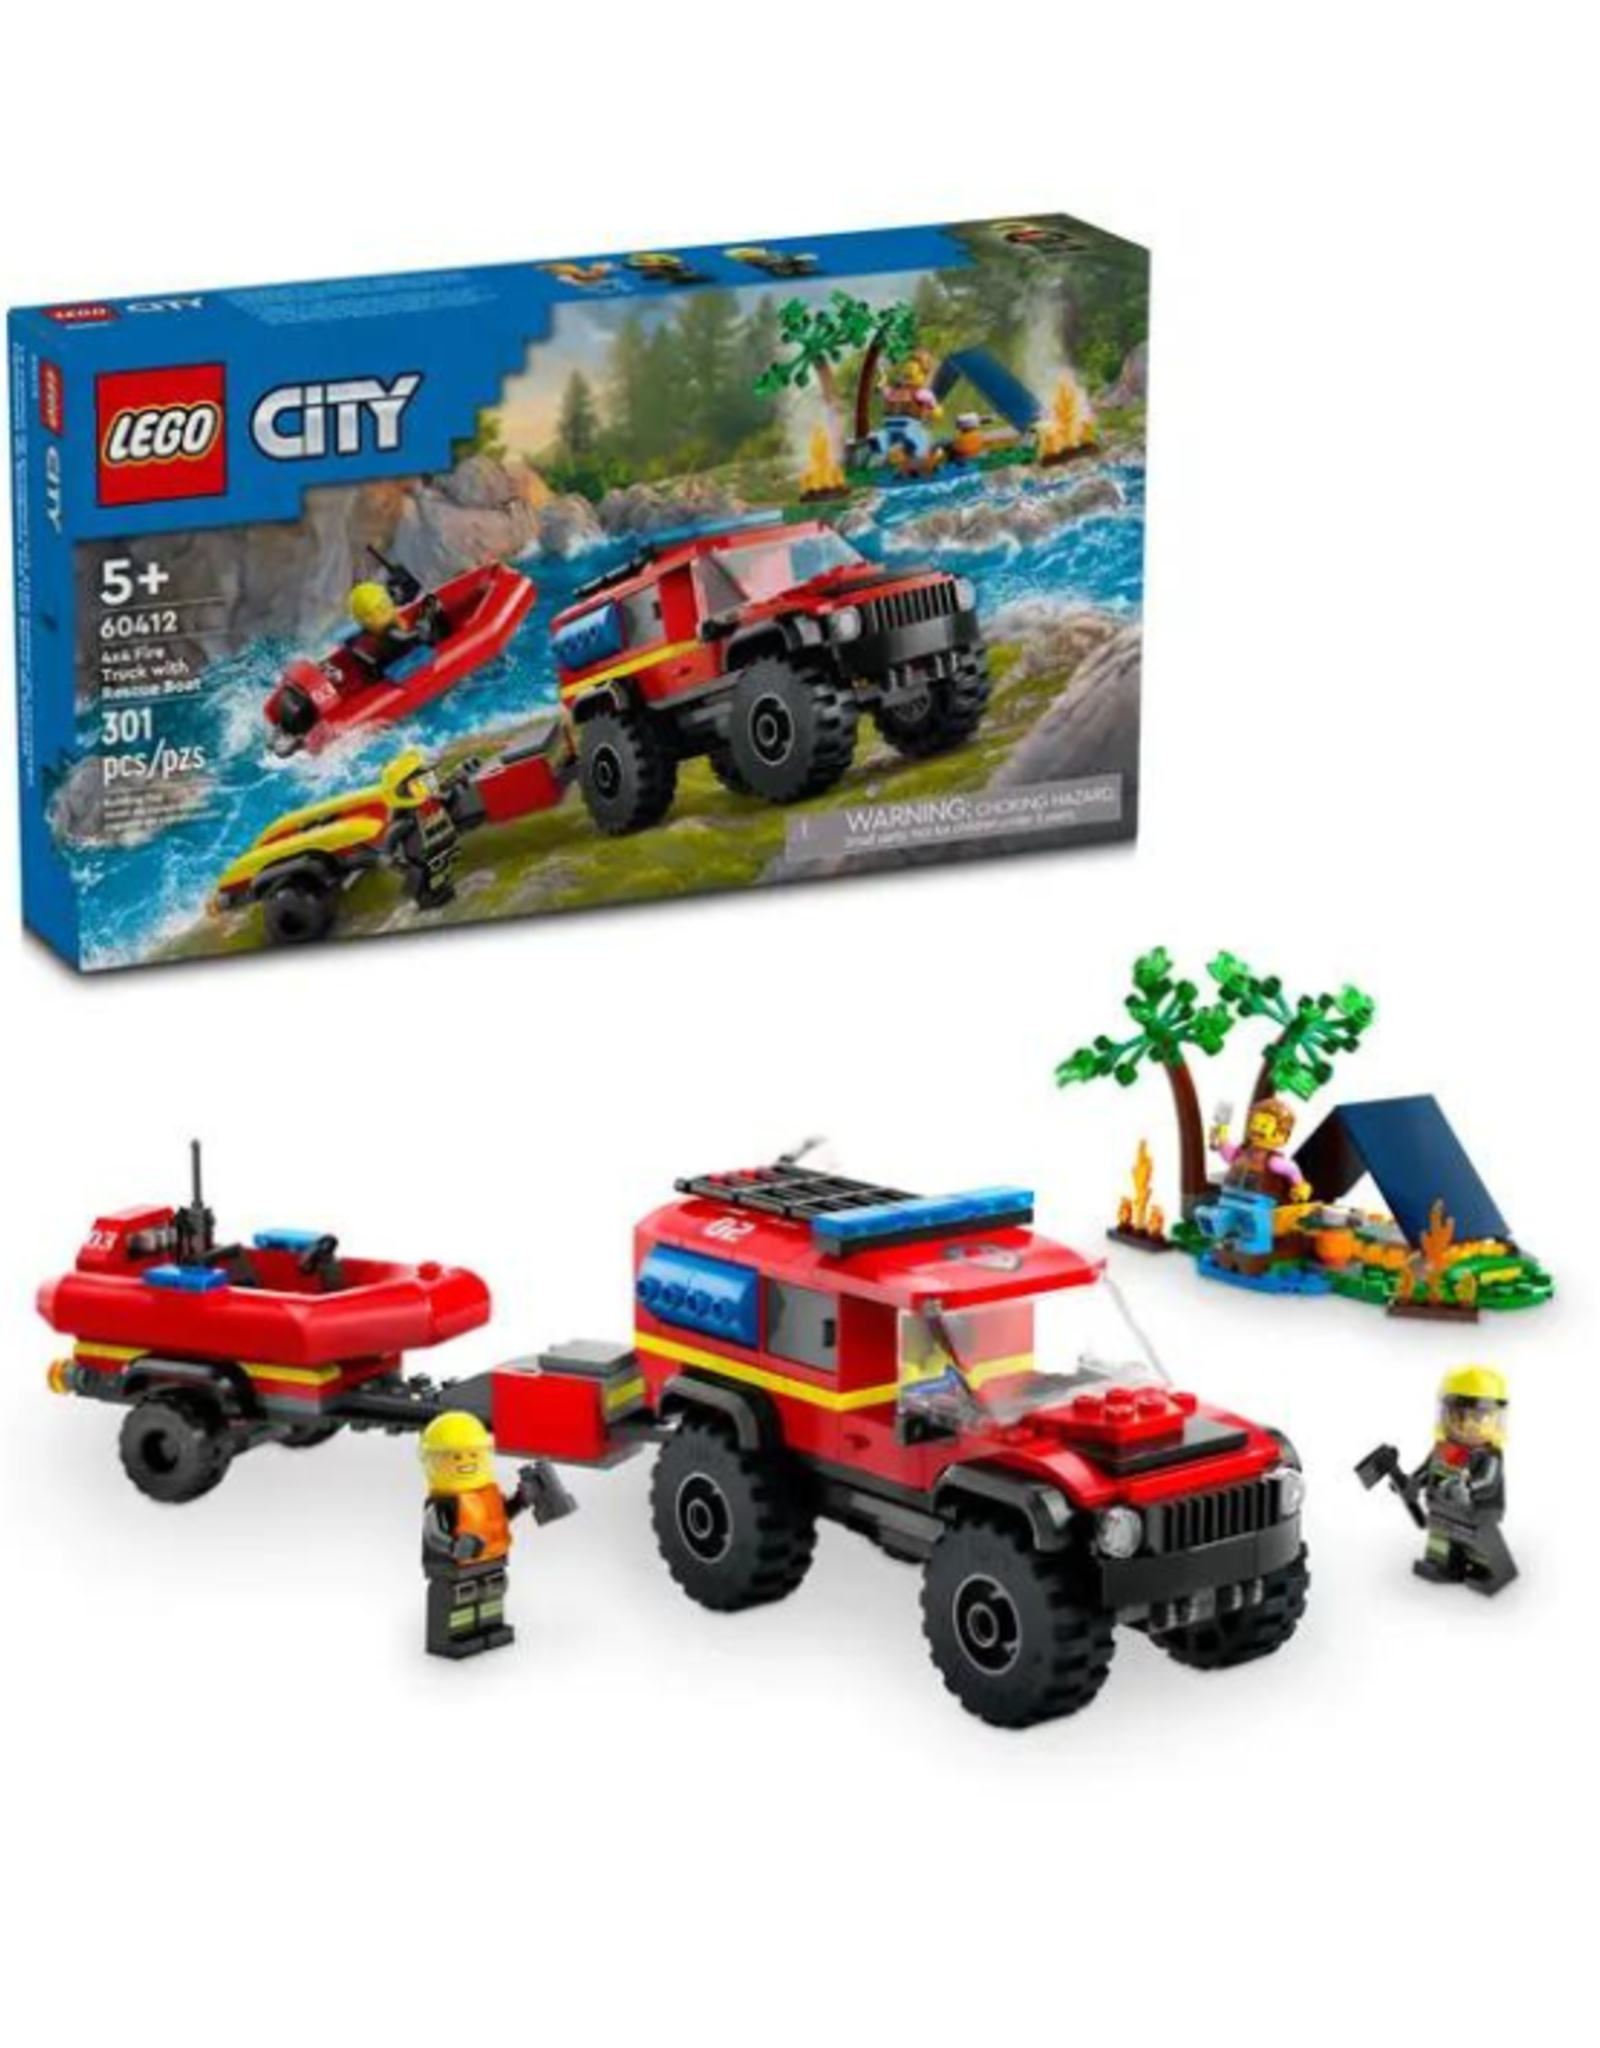 Lego Lego - City - 60412 - 4x4 Fire Truck with Rescue Boat